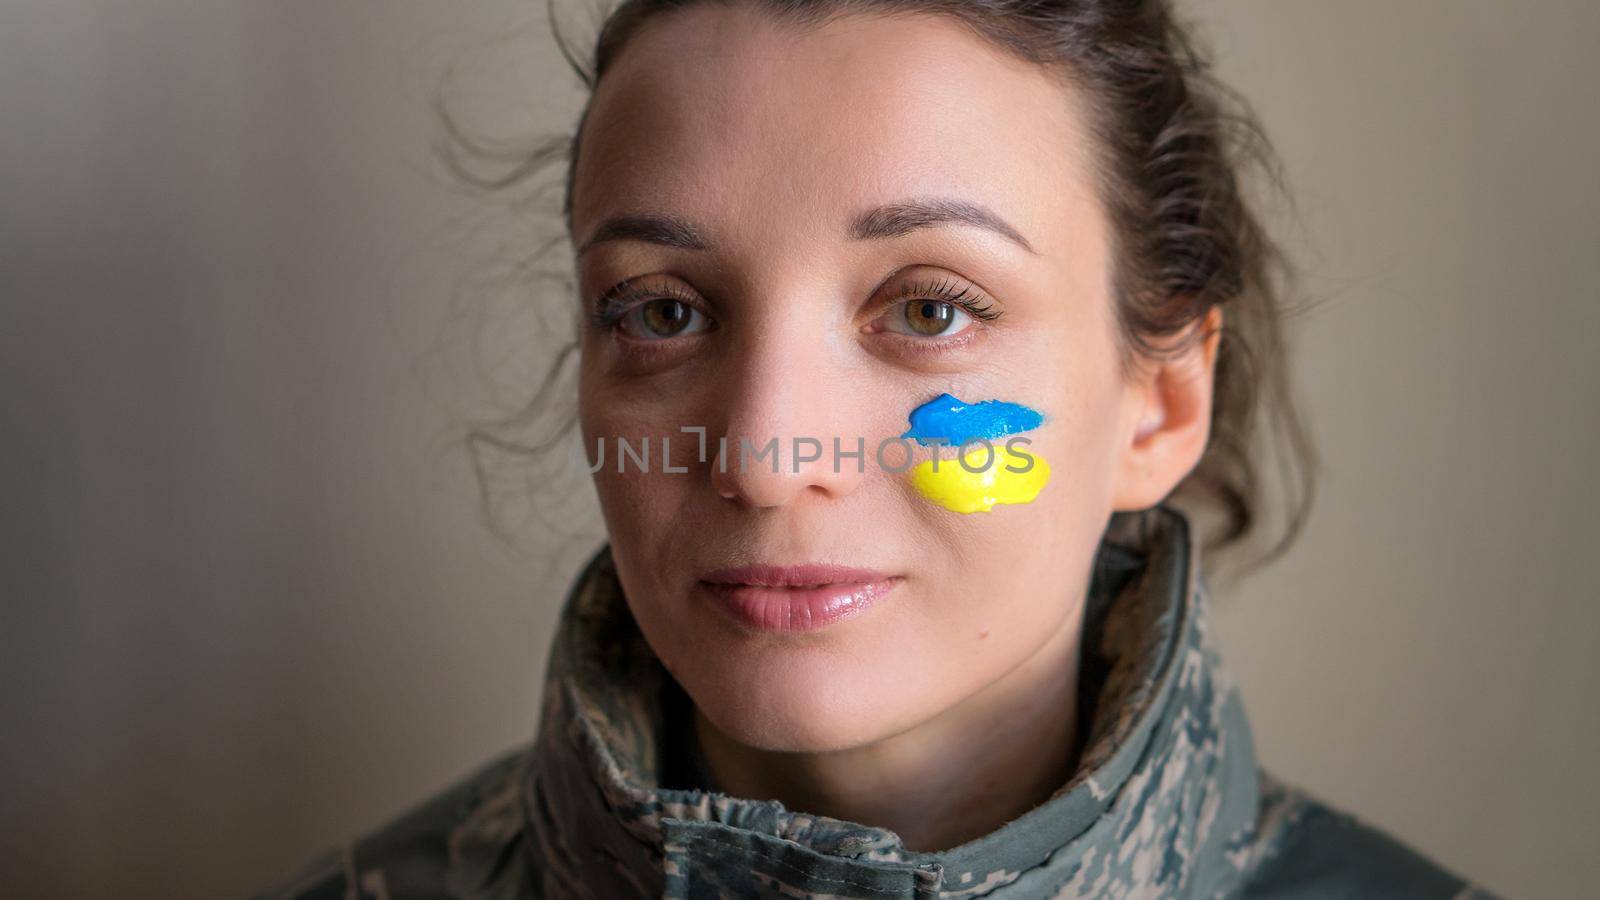 Indoor portrait of young girl with blue and yellow ukrainian flag on her cheek wearing military uniform, mandatory conscription in Ukraine, equality concepts by balinska_lv